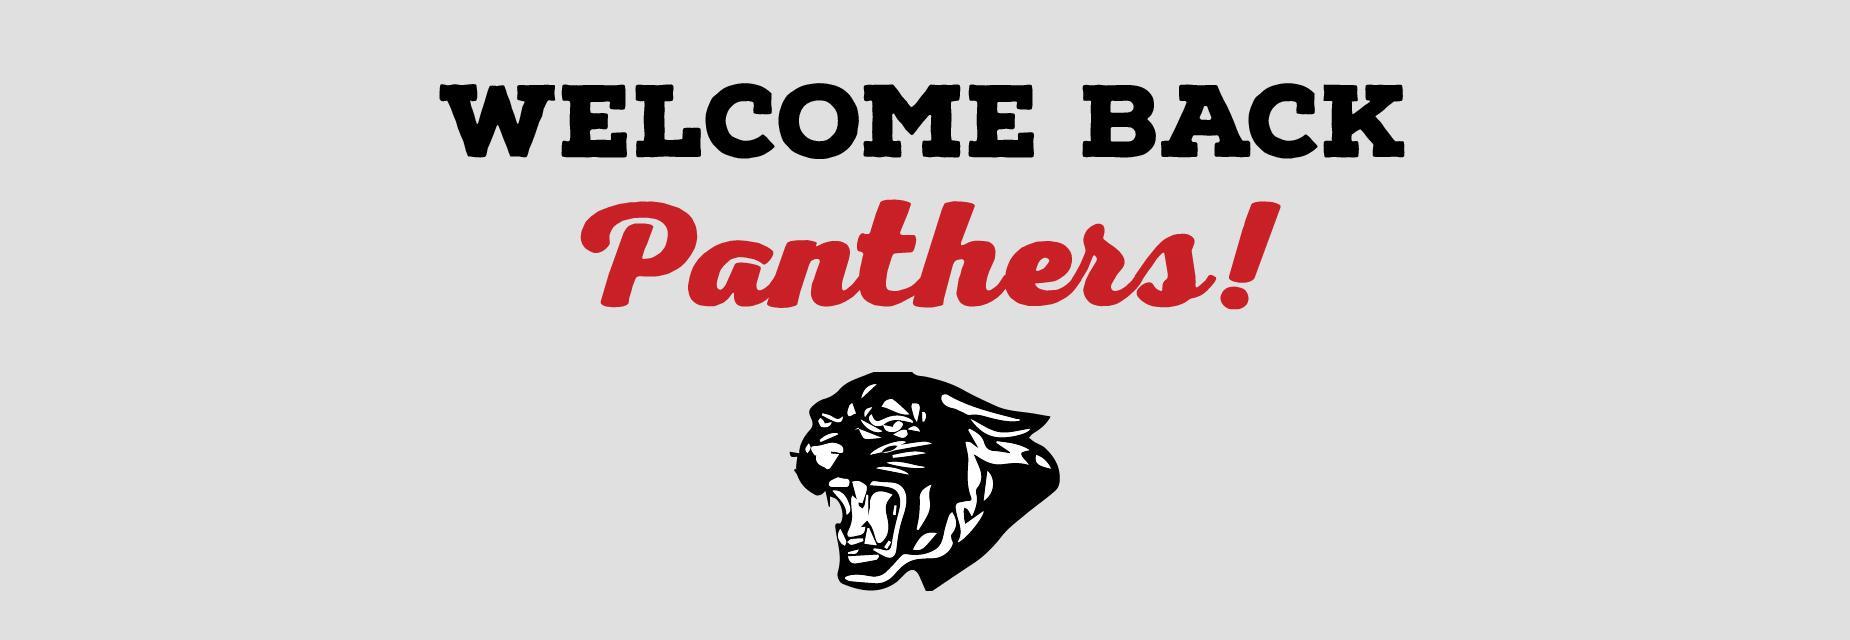 Welcome Back Panthers